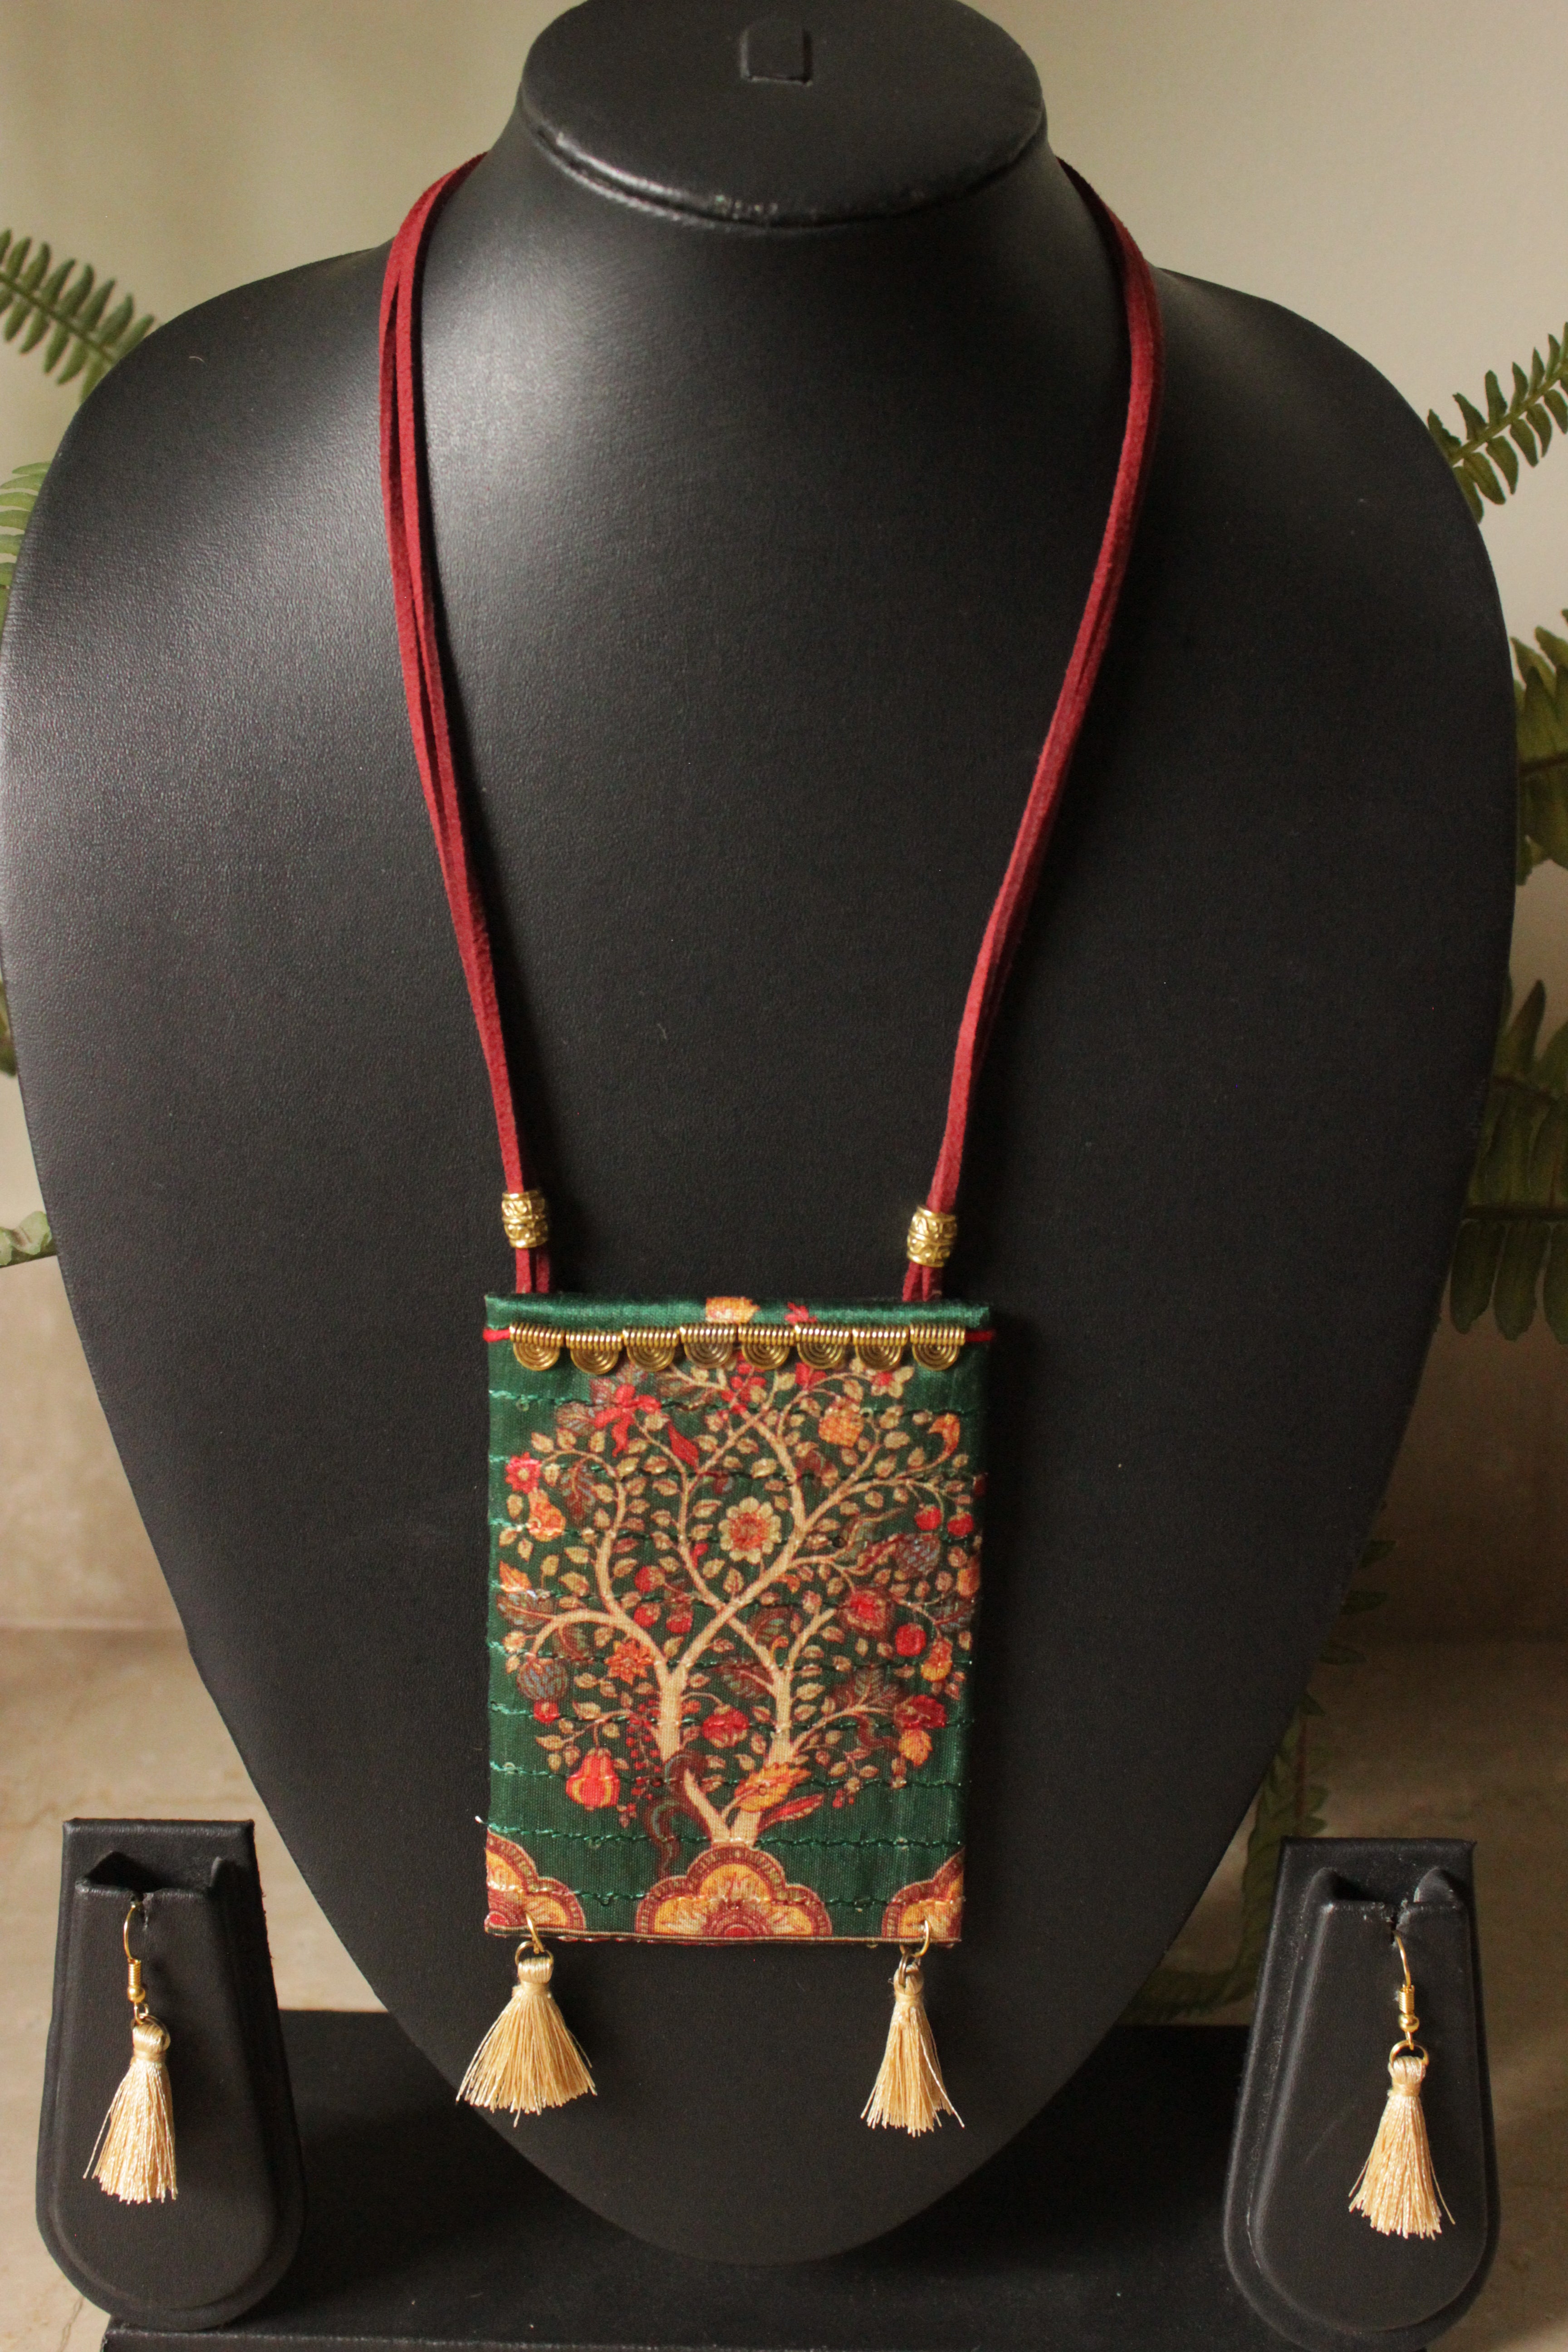 Tree Printed Green Silk Fabric Adjustable Rope Closure Necklace Set with Gold Finish Metal Accents